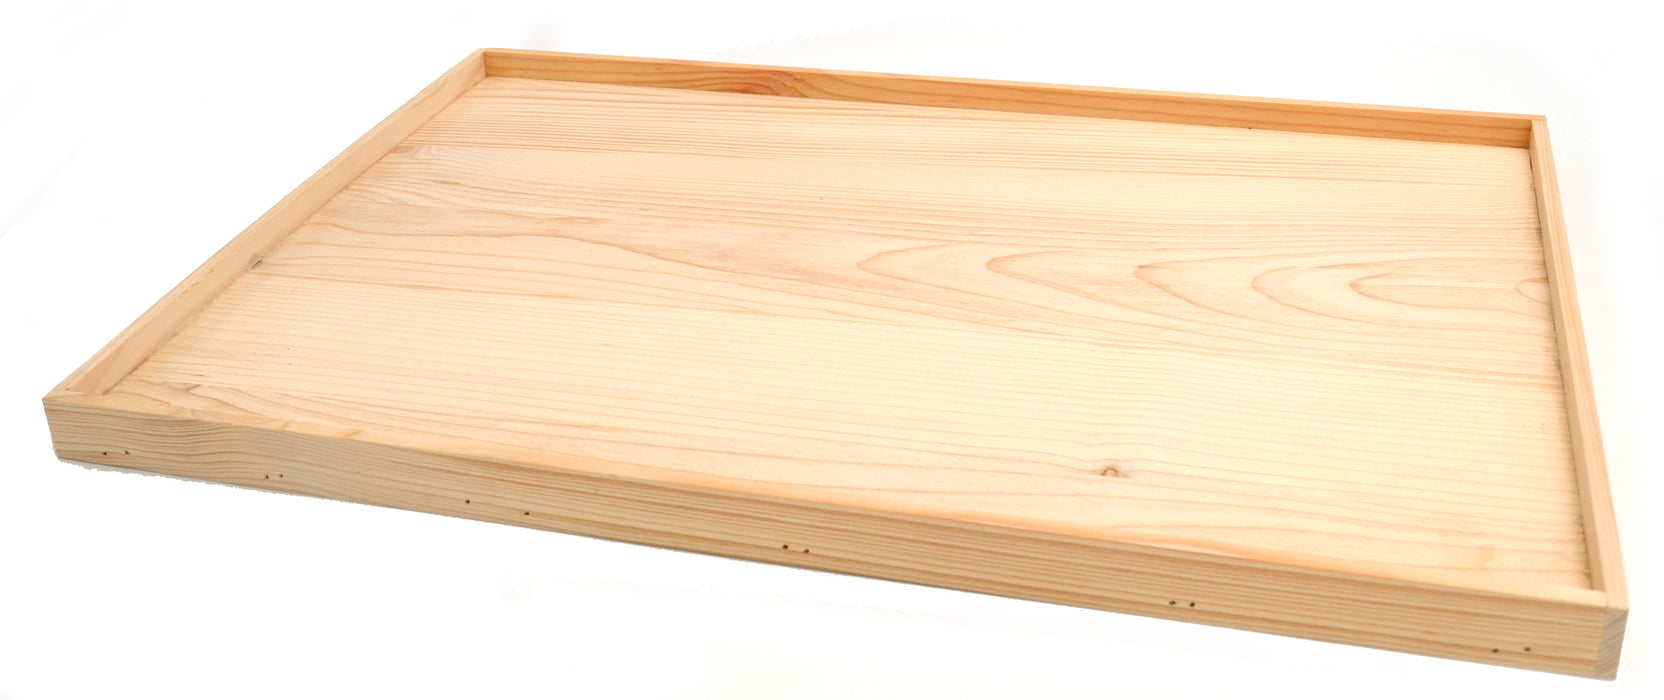 Dissection Board, 21 Inch - Softwood